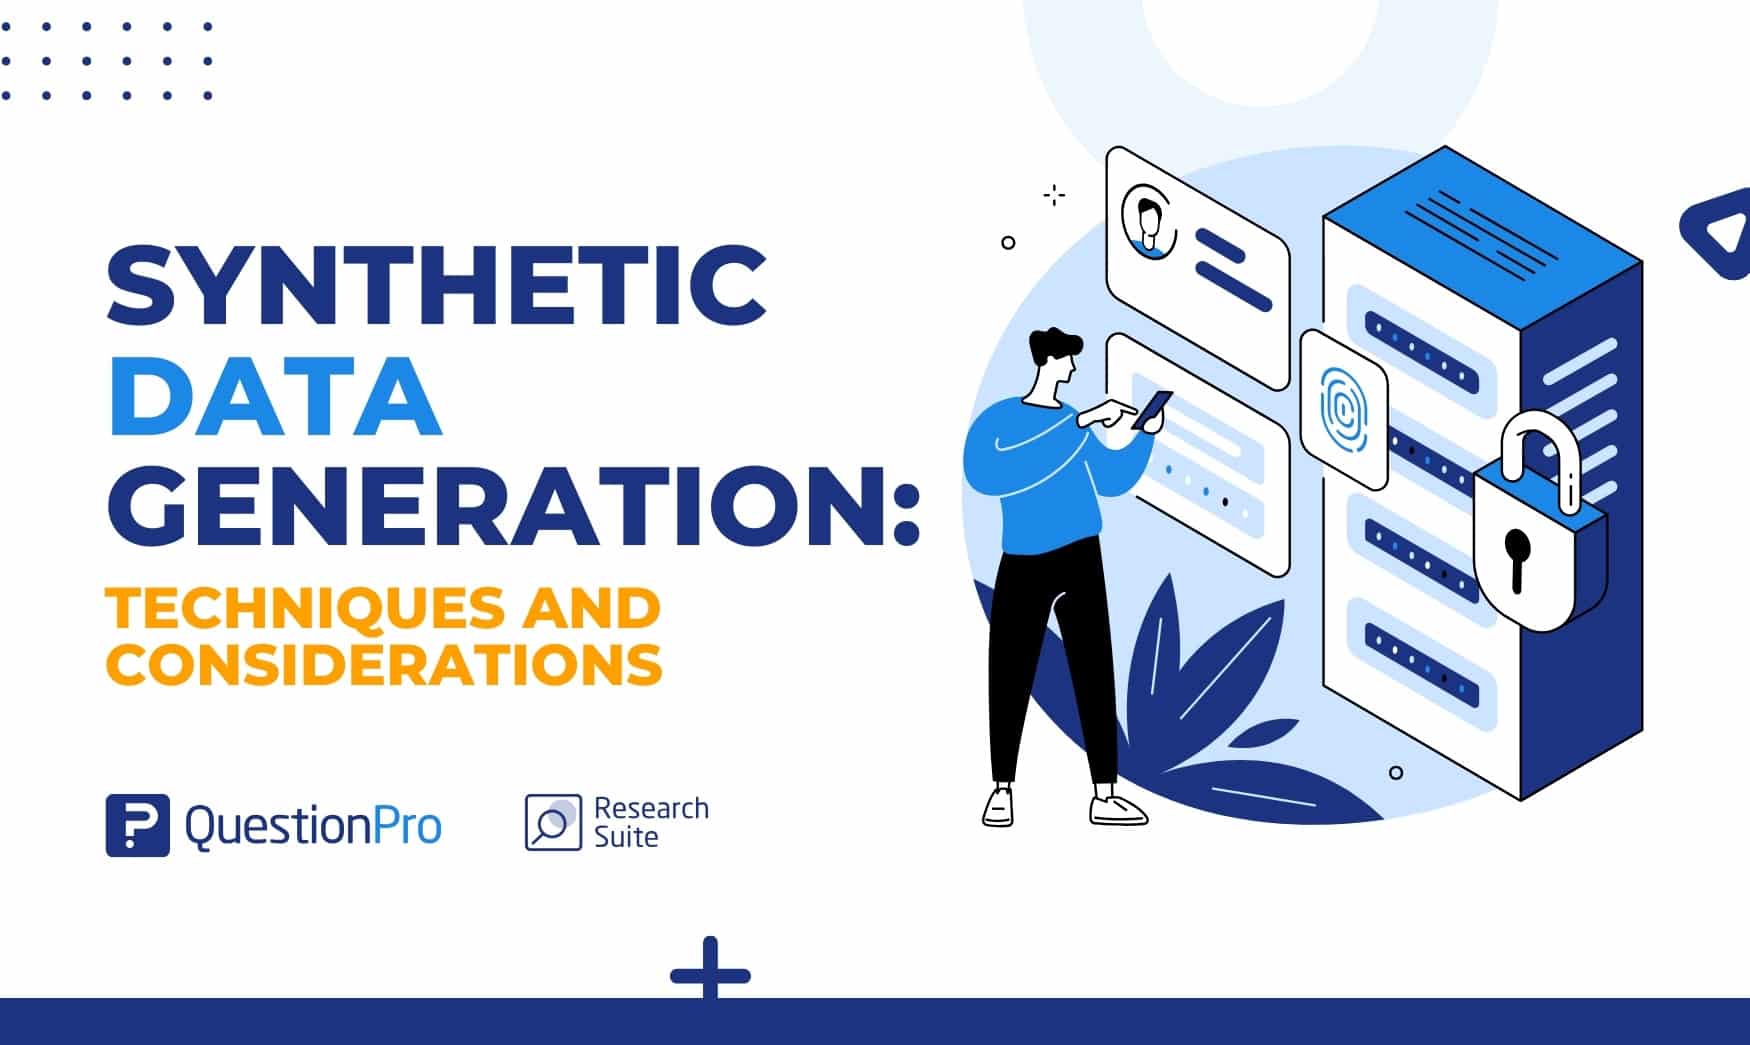 Elevate your data insights with synthetic data generation techniques. Discover methods, applications, and considerations in this post.